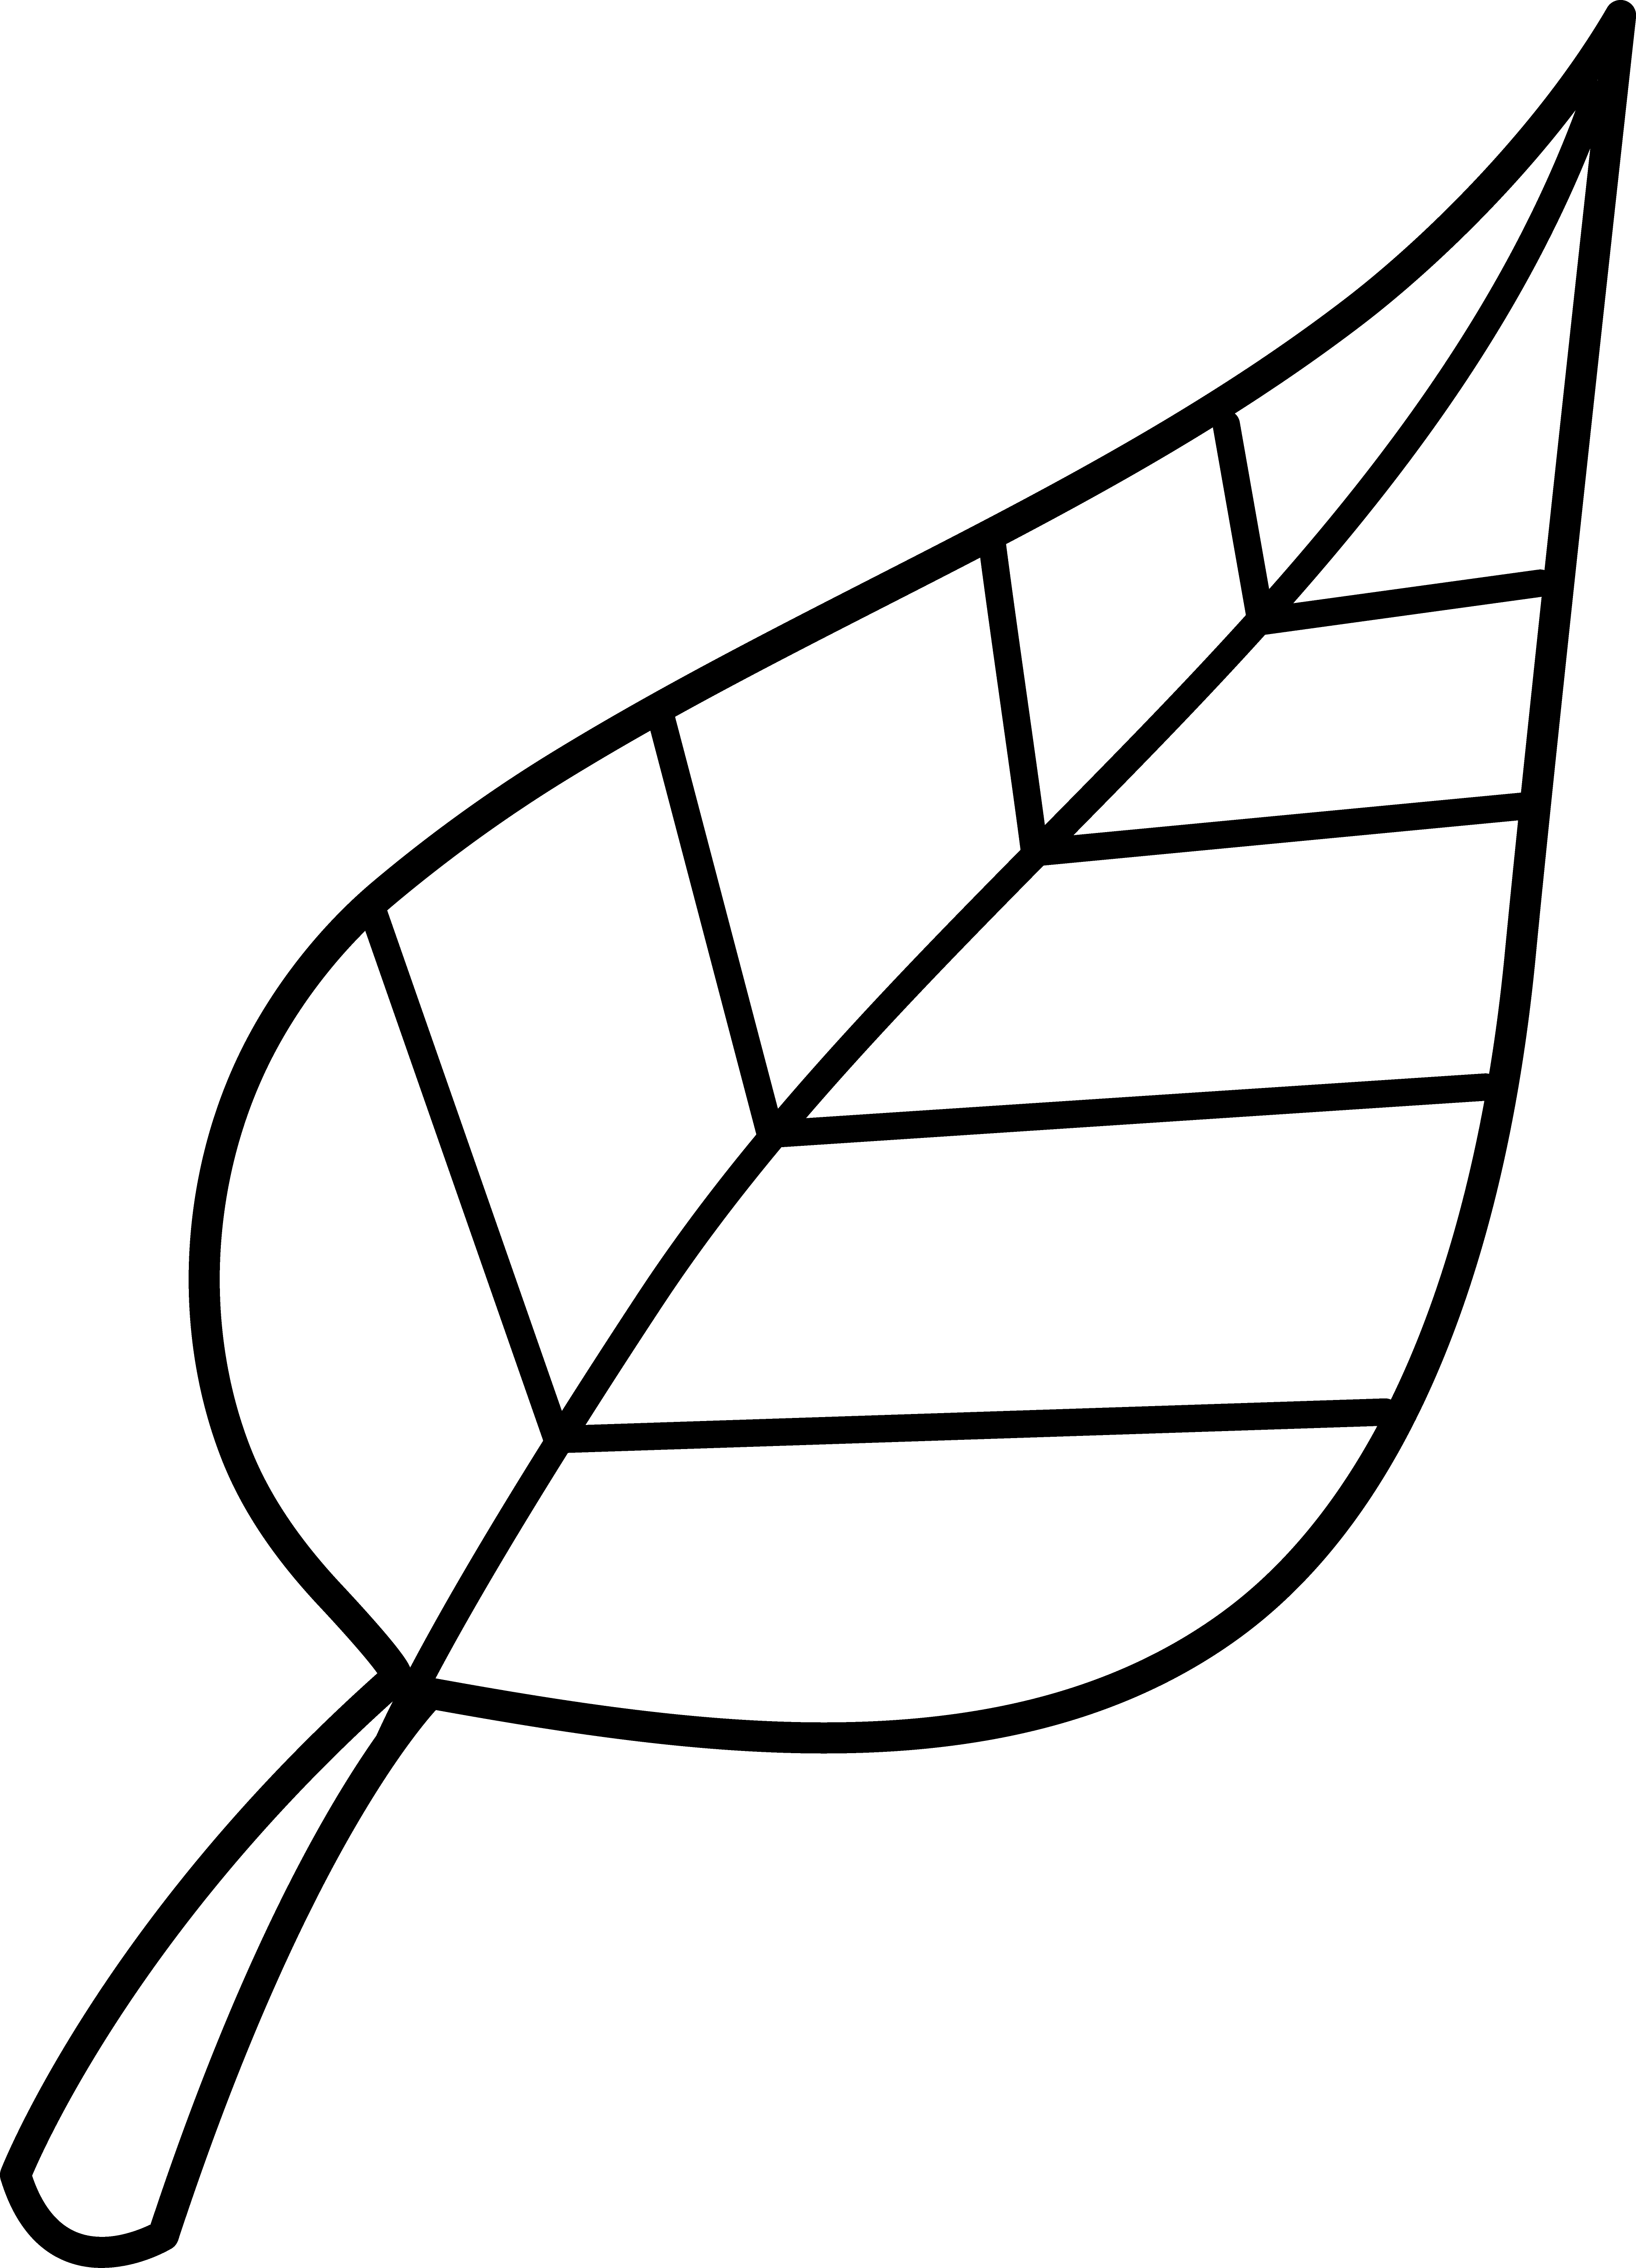 Leaves leaf clip art black and white free clipart